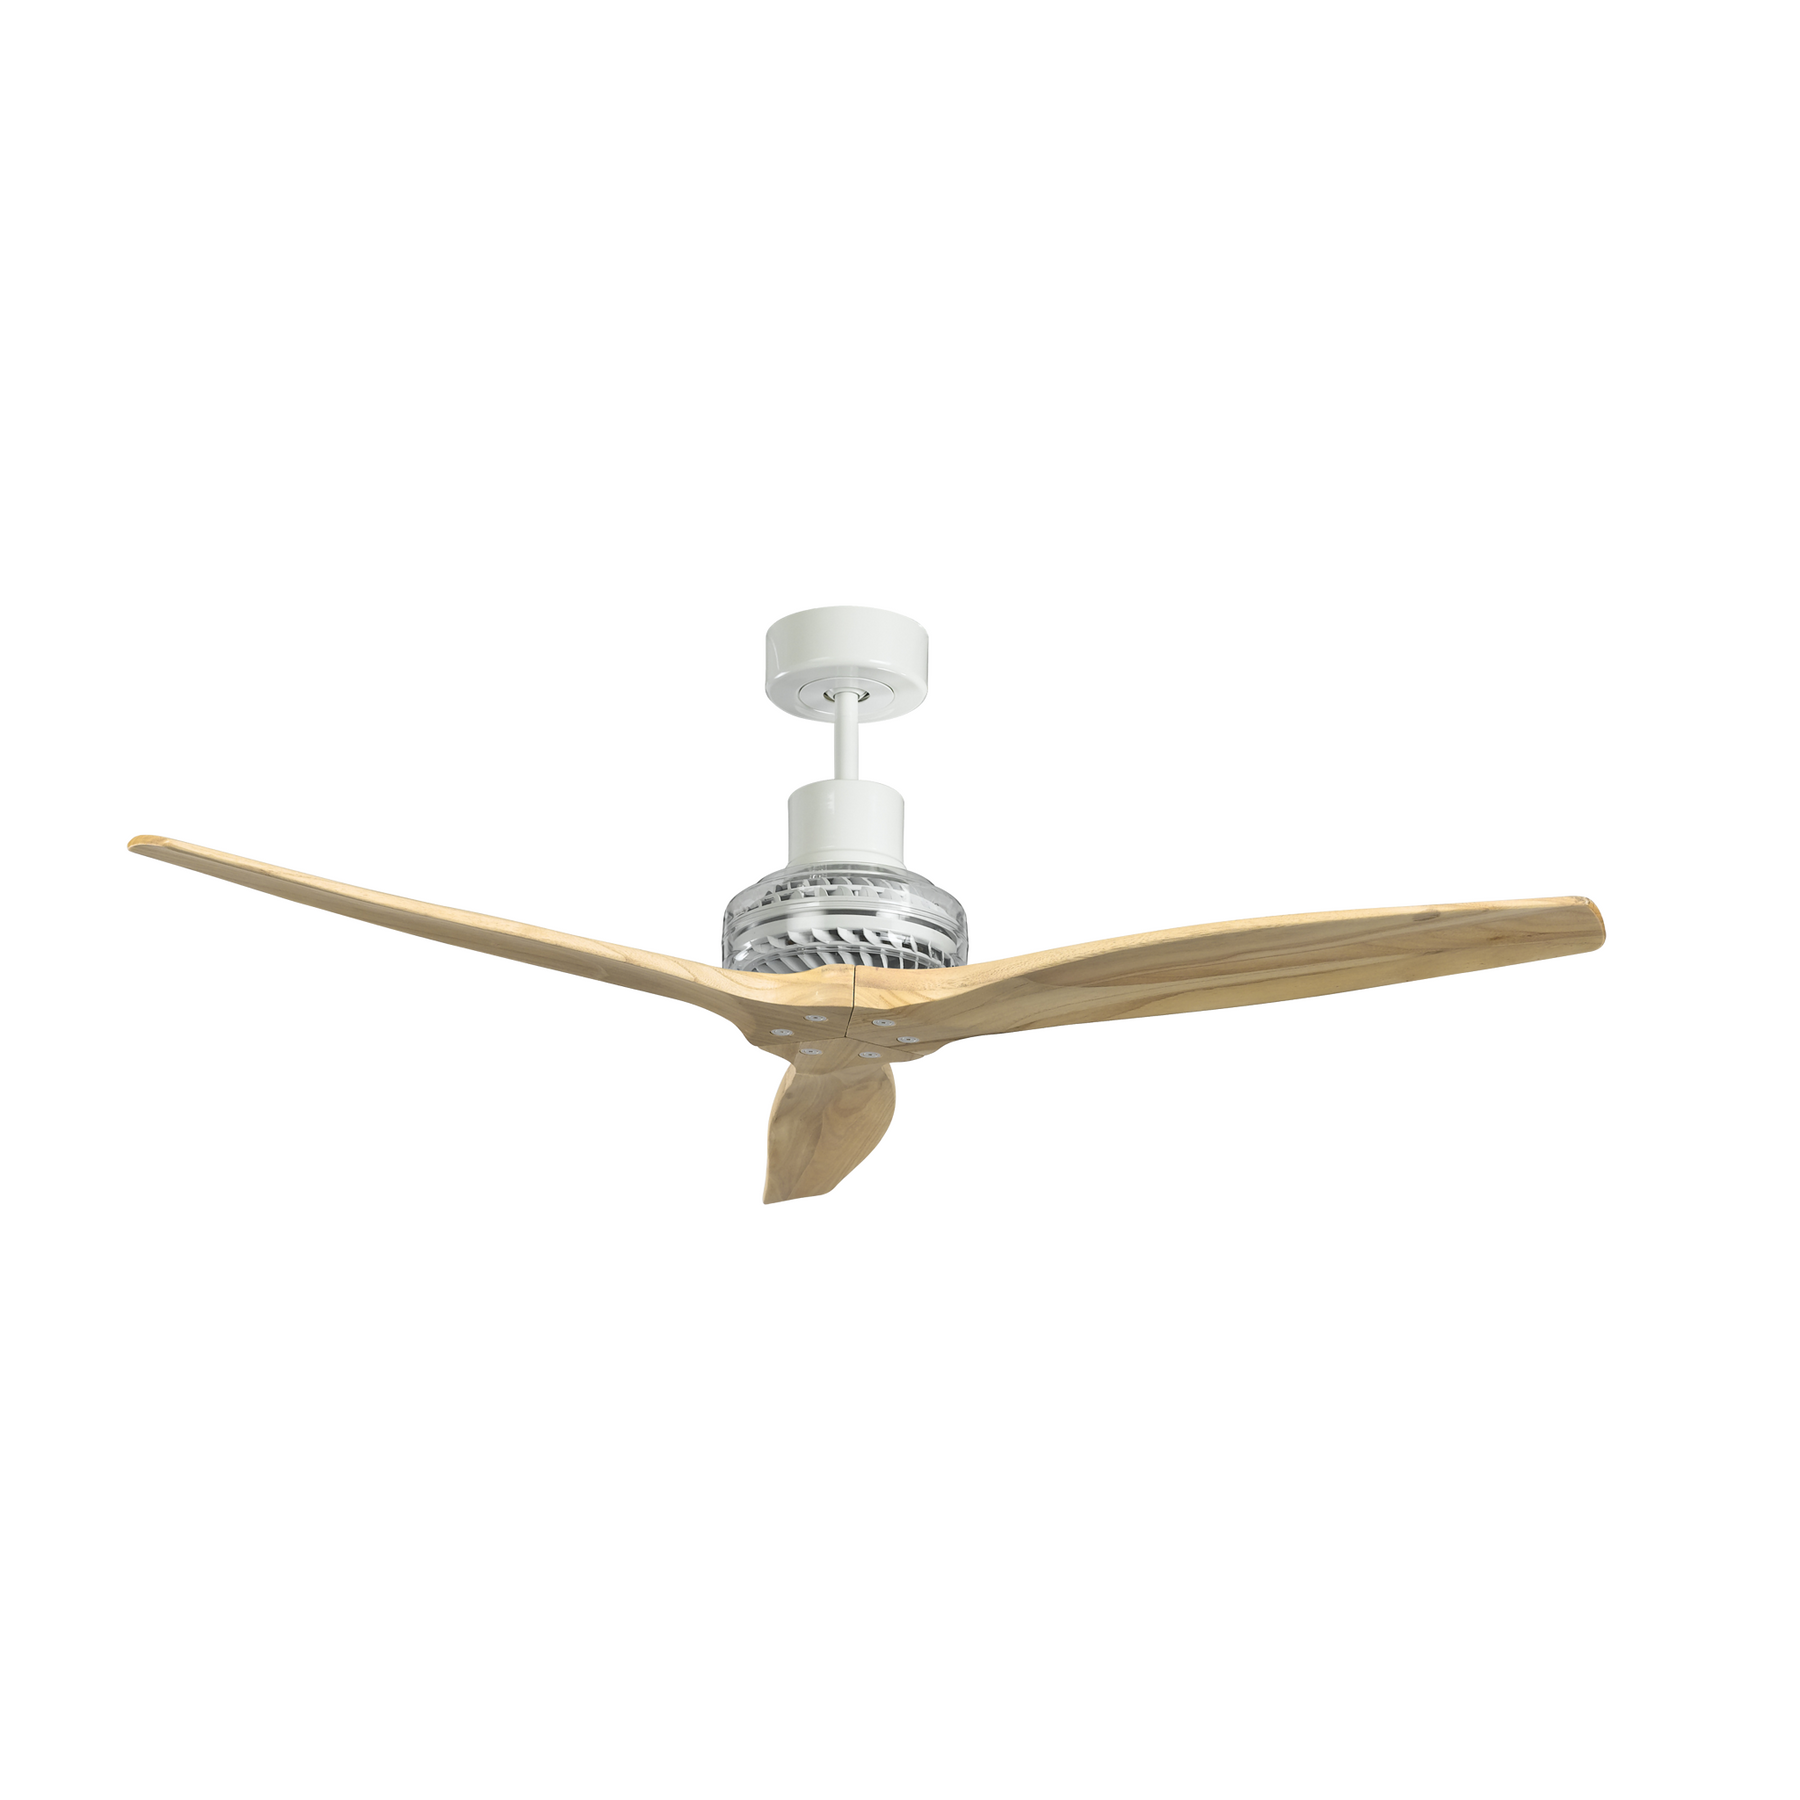 Preference aflange trofast Star Fans - Indoor Outdoor Contemporary Ceiling Fans